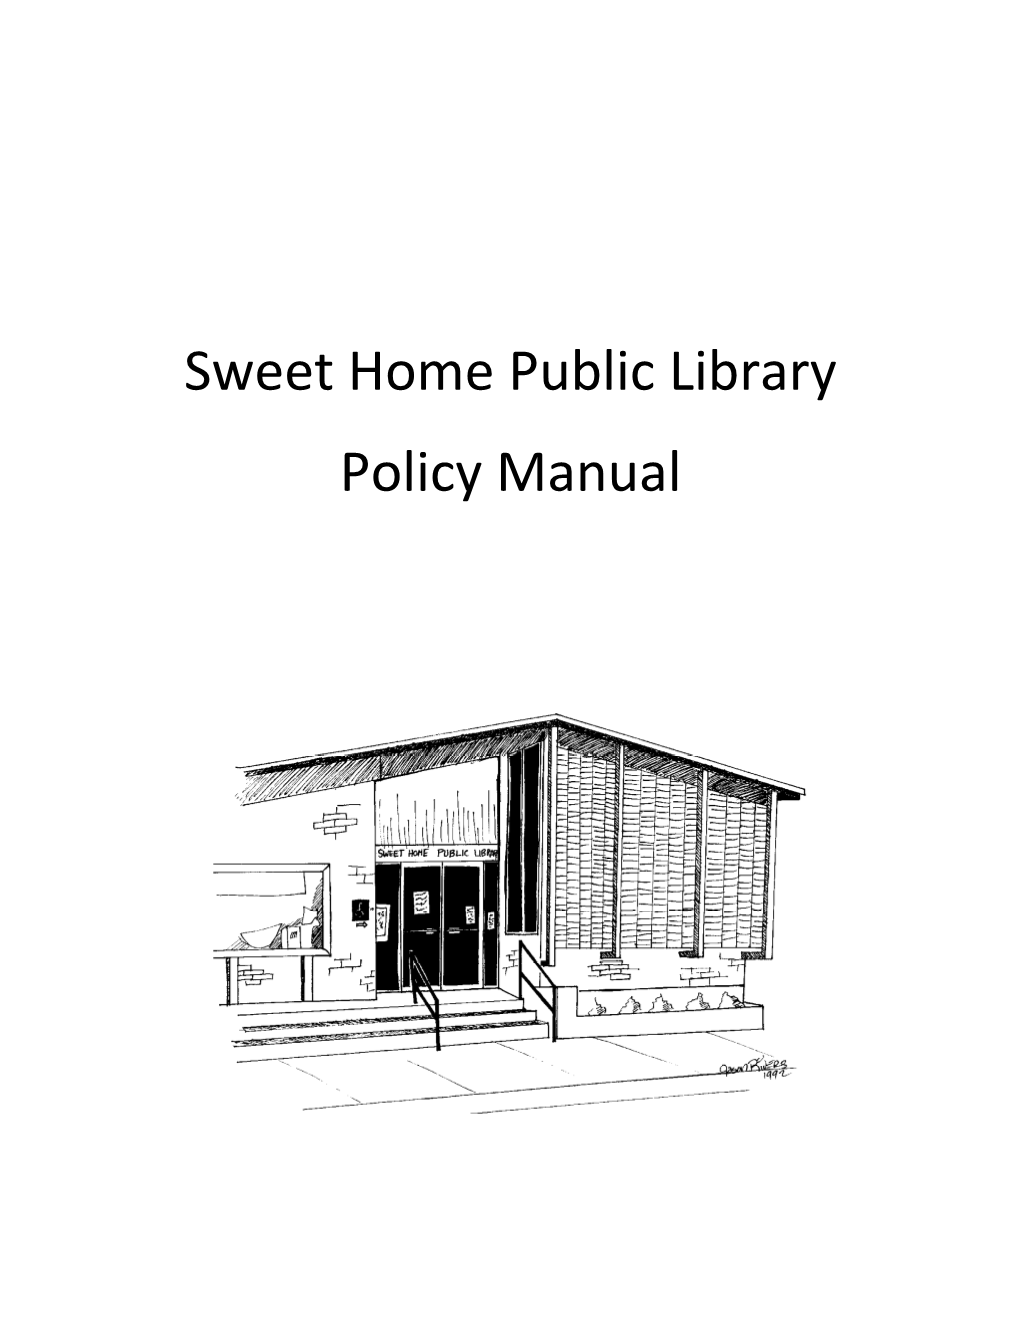 Sweet Home Public Library Policy Manual